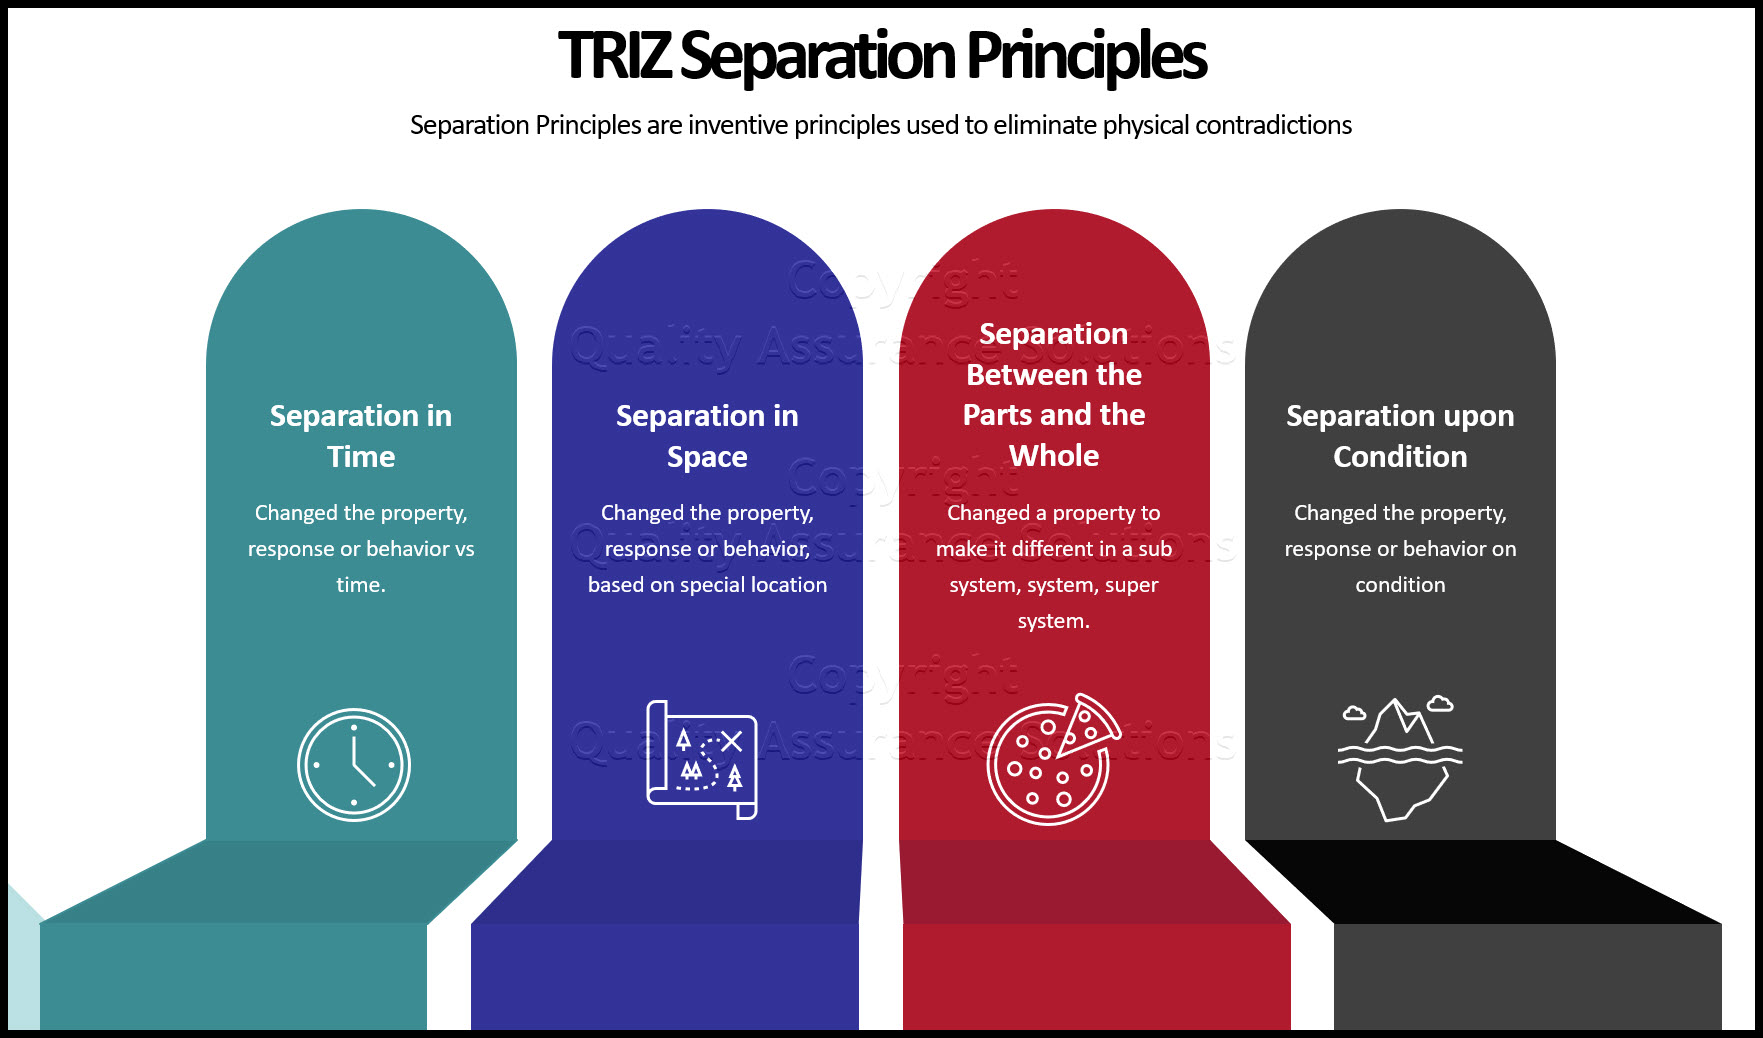 TRIZ Separation Principles are inventive principles used to eliminate physical contradictions